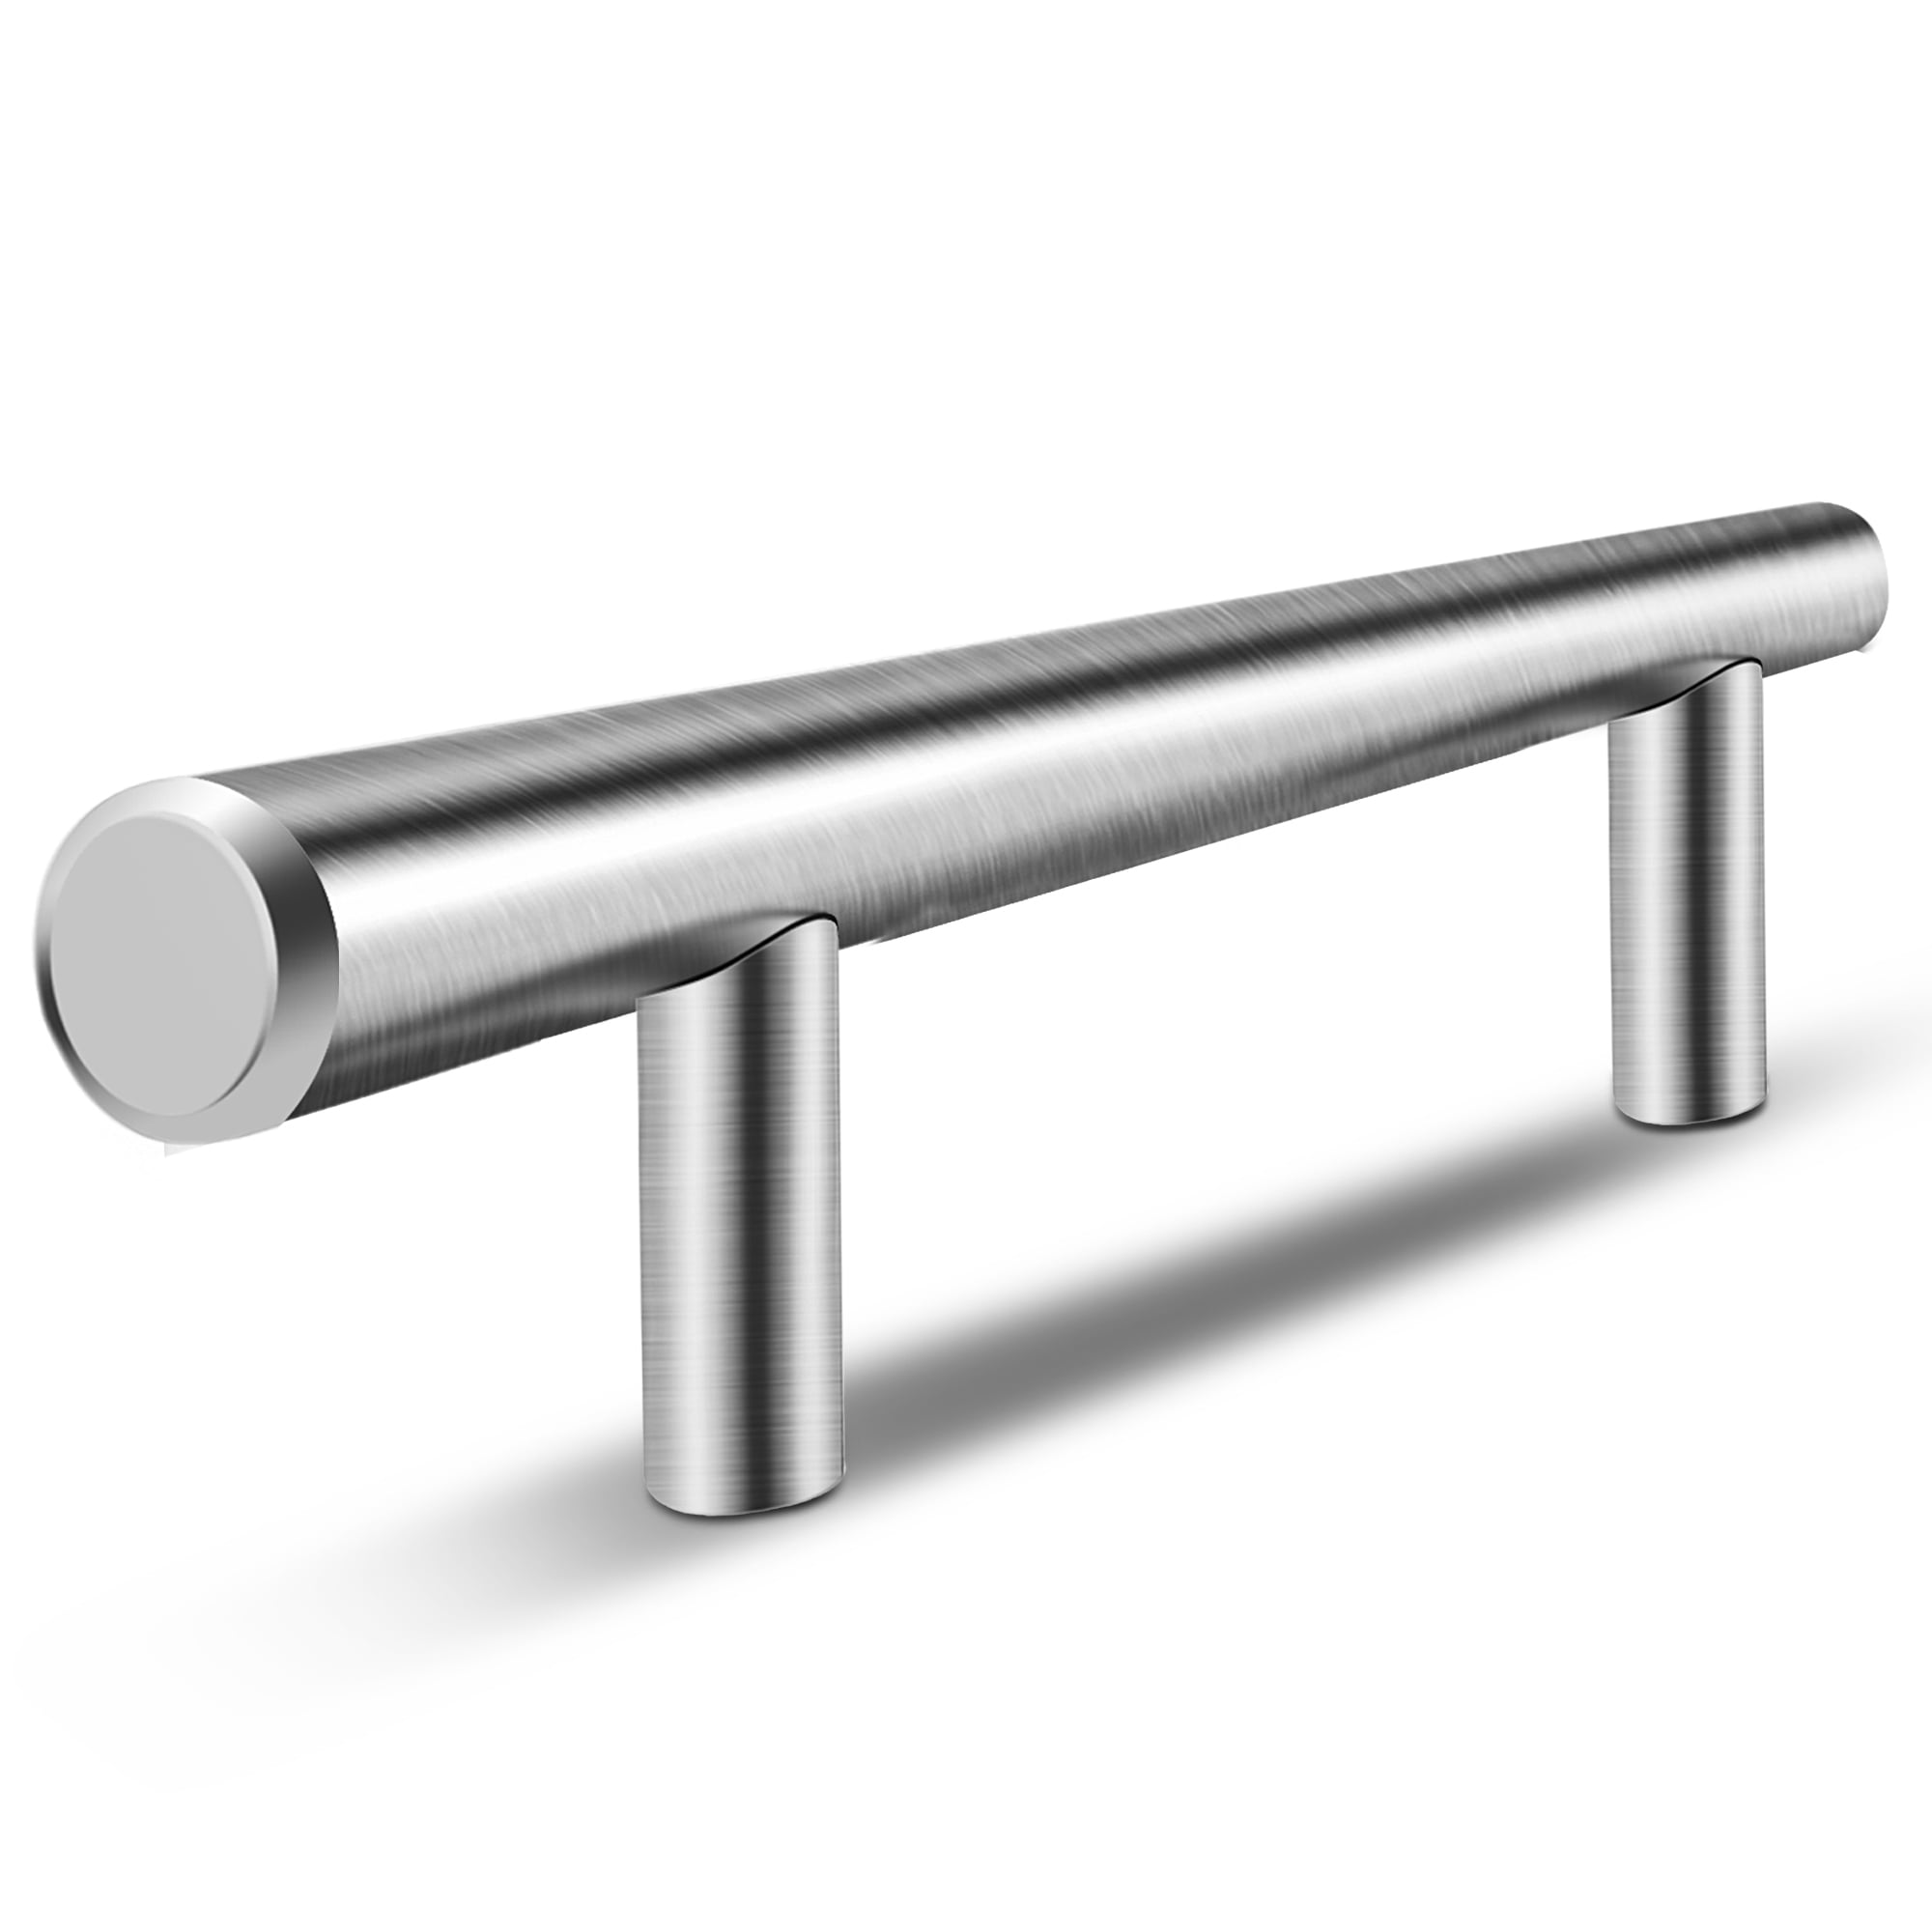  30 Pack 5 Cabinet Pulls Brushed Nickel Stainless Steel  Kitchen Drawer Pulls Cabinet Handles 3 Hole Center